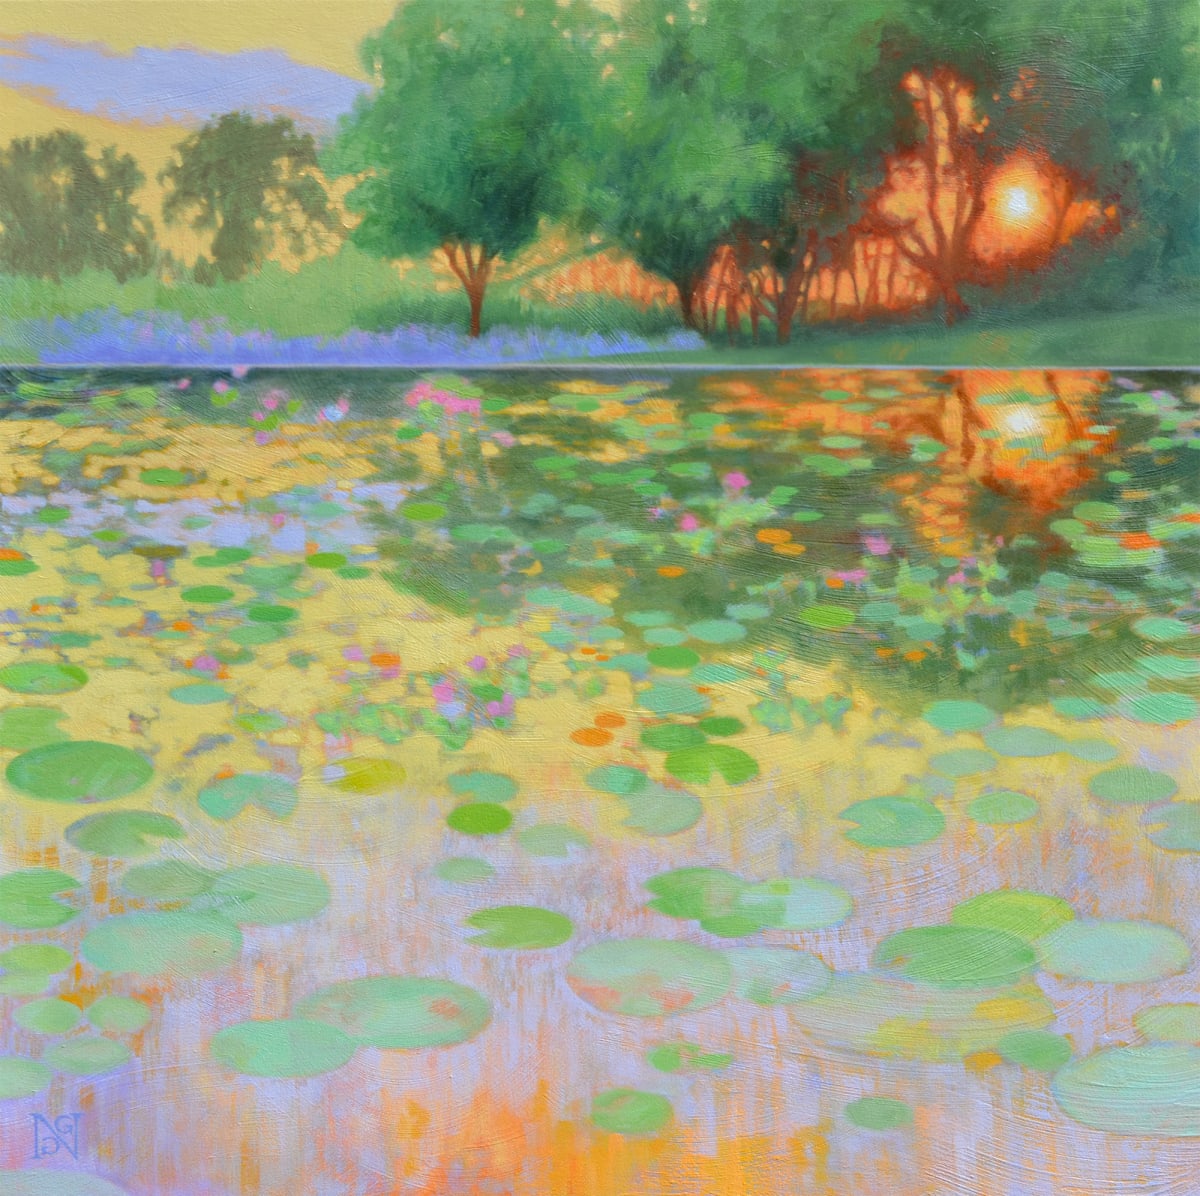 Lily Pond in Gold by Natalie George  Image: Oil over Acrylic on Canvas